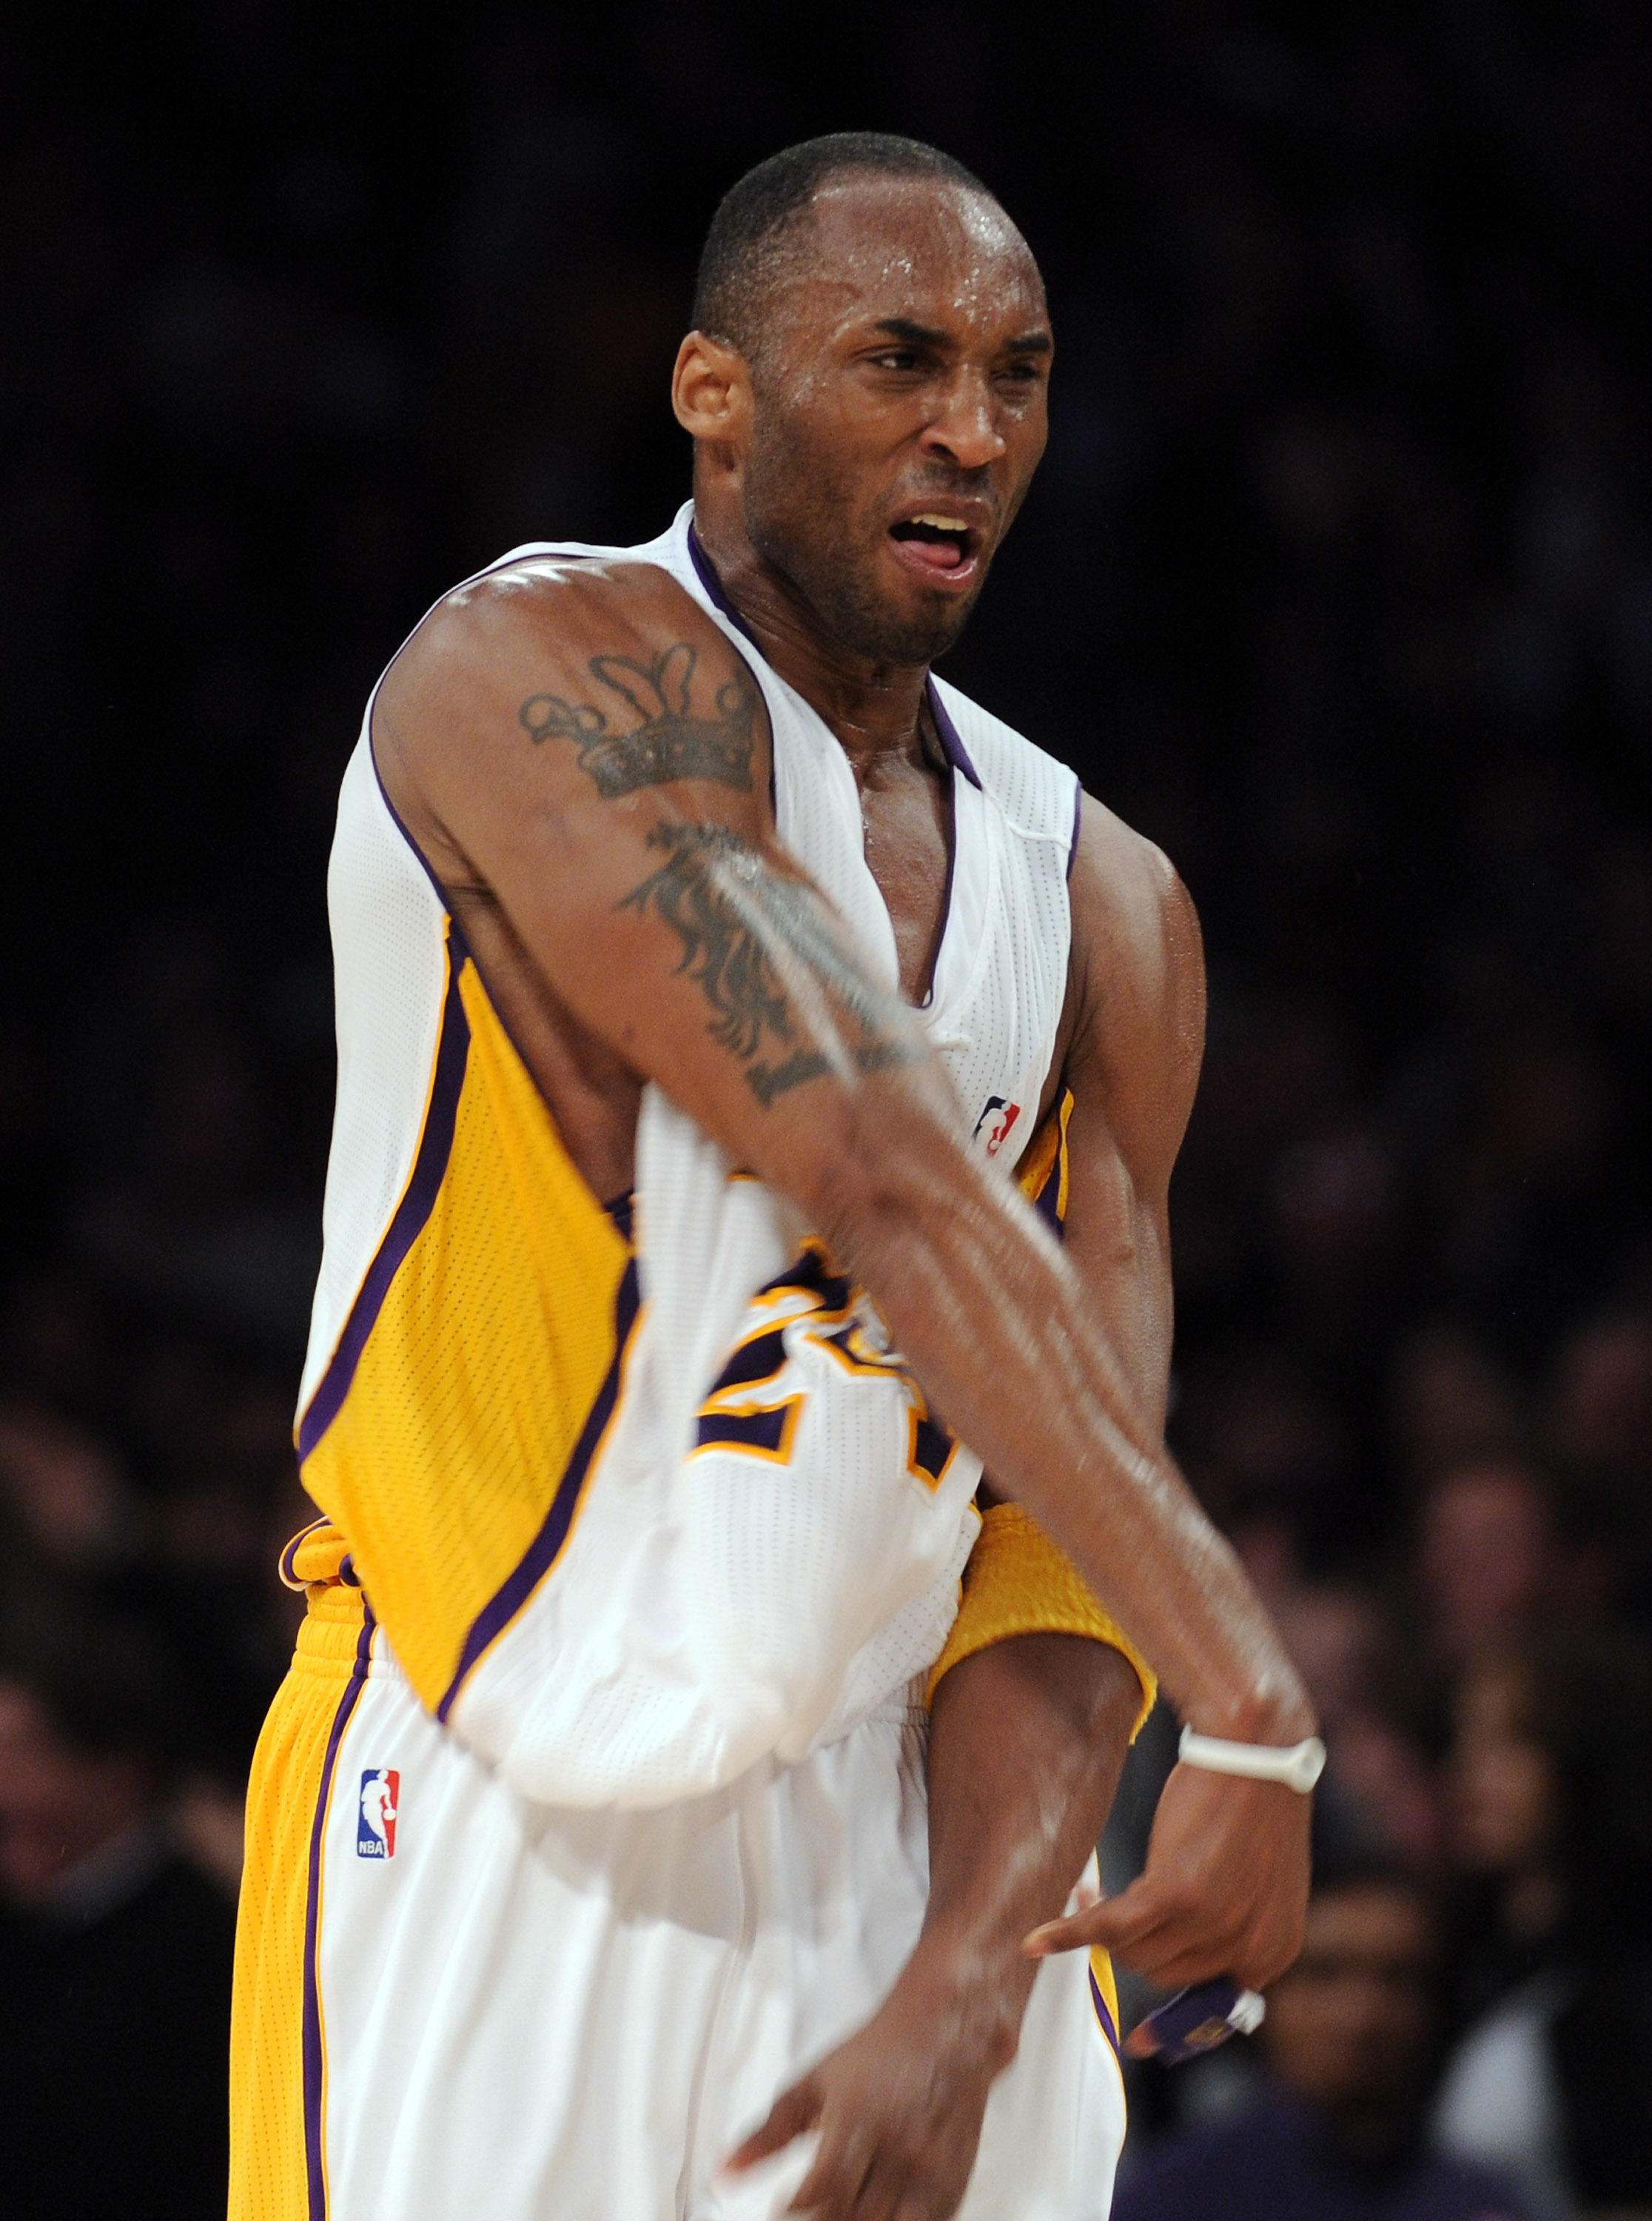 LOS ANGELES, CA - MARCH 20:  Kobe Bryant #24 of the Los Angeles Lakers celebrates his basket in the last minute on way to an 84-80 win over the  Portland Trail Blazers at the Staples Center on March 20, 2011 in Los Angeles, California.  NOTE TO USER: User